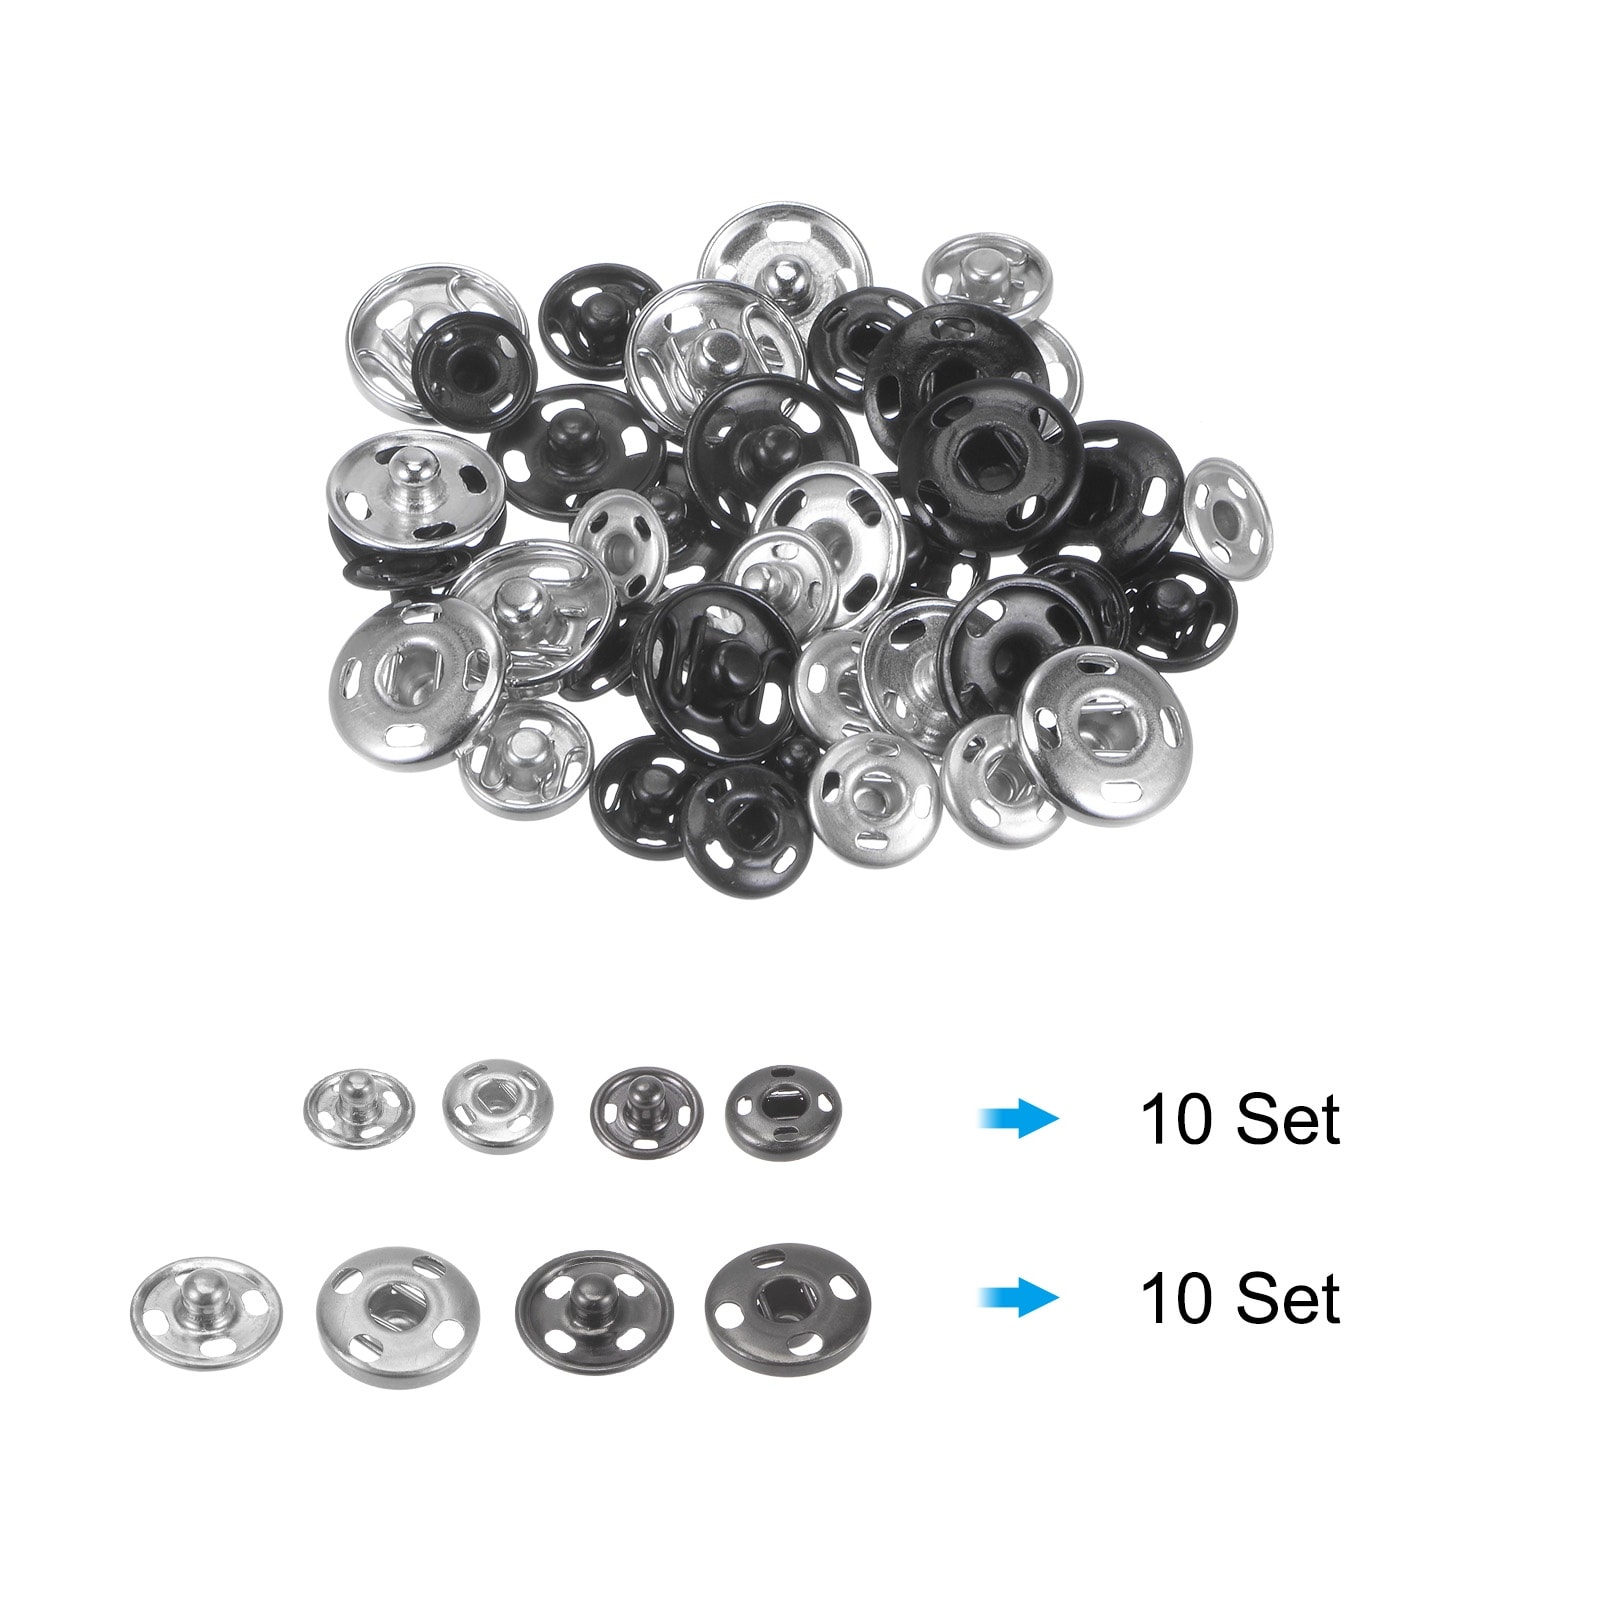 HOTBEST 10 Sets Snap Fasteners Kit Metal Snaps Fasteners Sew-on